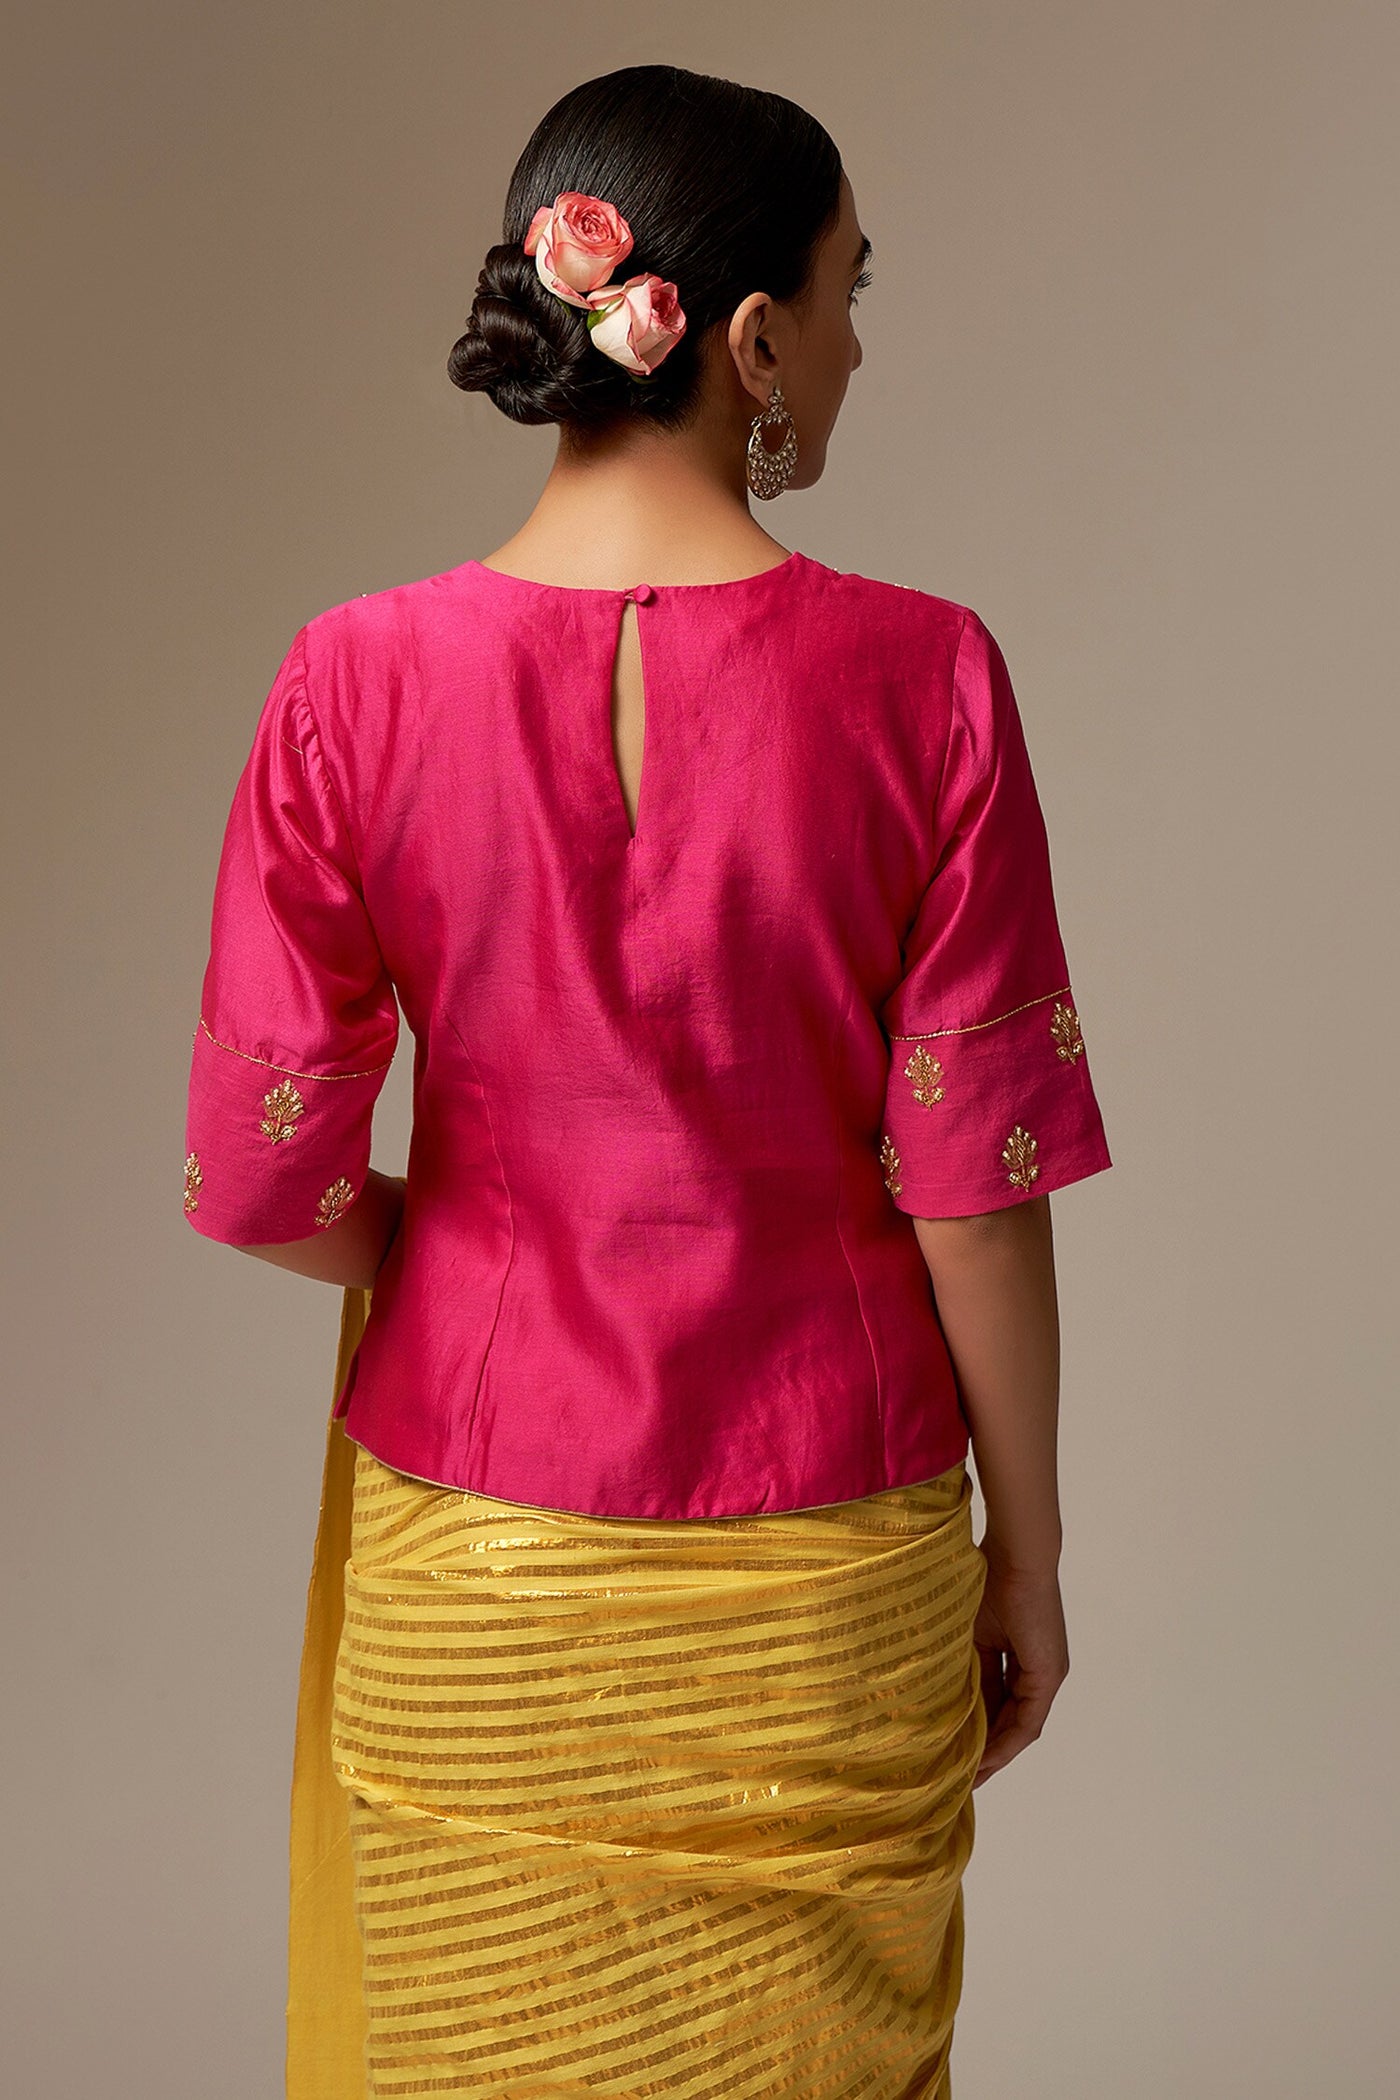 Pink Chanderi Silk Blouse - Indian Clothing in Denver, CO, Aurora, CO, Boulder, CO, Fort Collins, CO, Colorado Springs, CO, Parker, CO, Highlands Ranch, CO, Cherry Creek, CO, Centennial, CO, and Longmont, CO. Nationwide shipping USA - India Fashion X